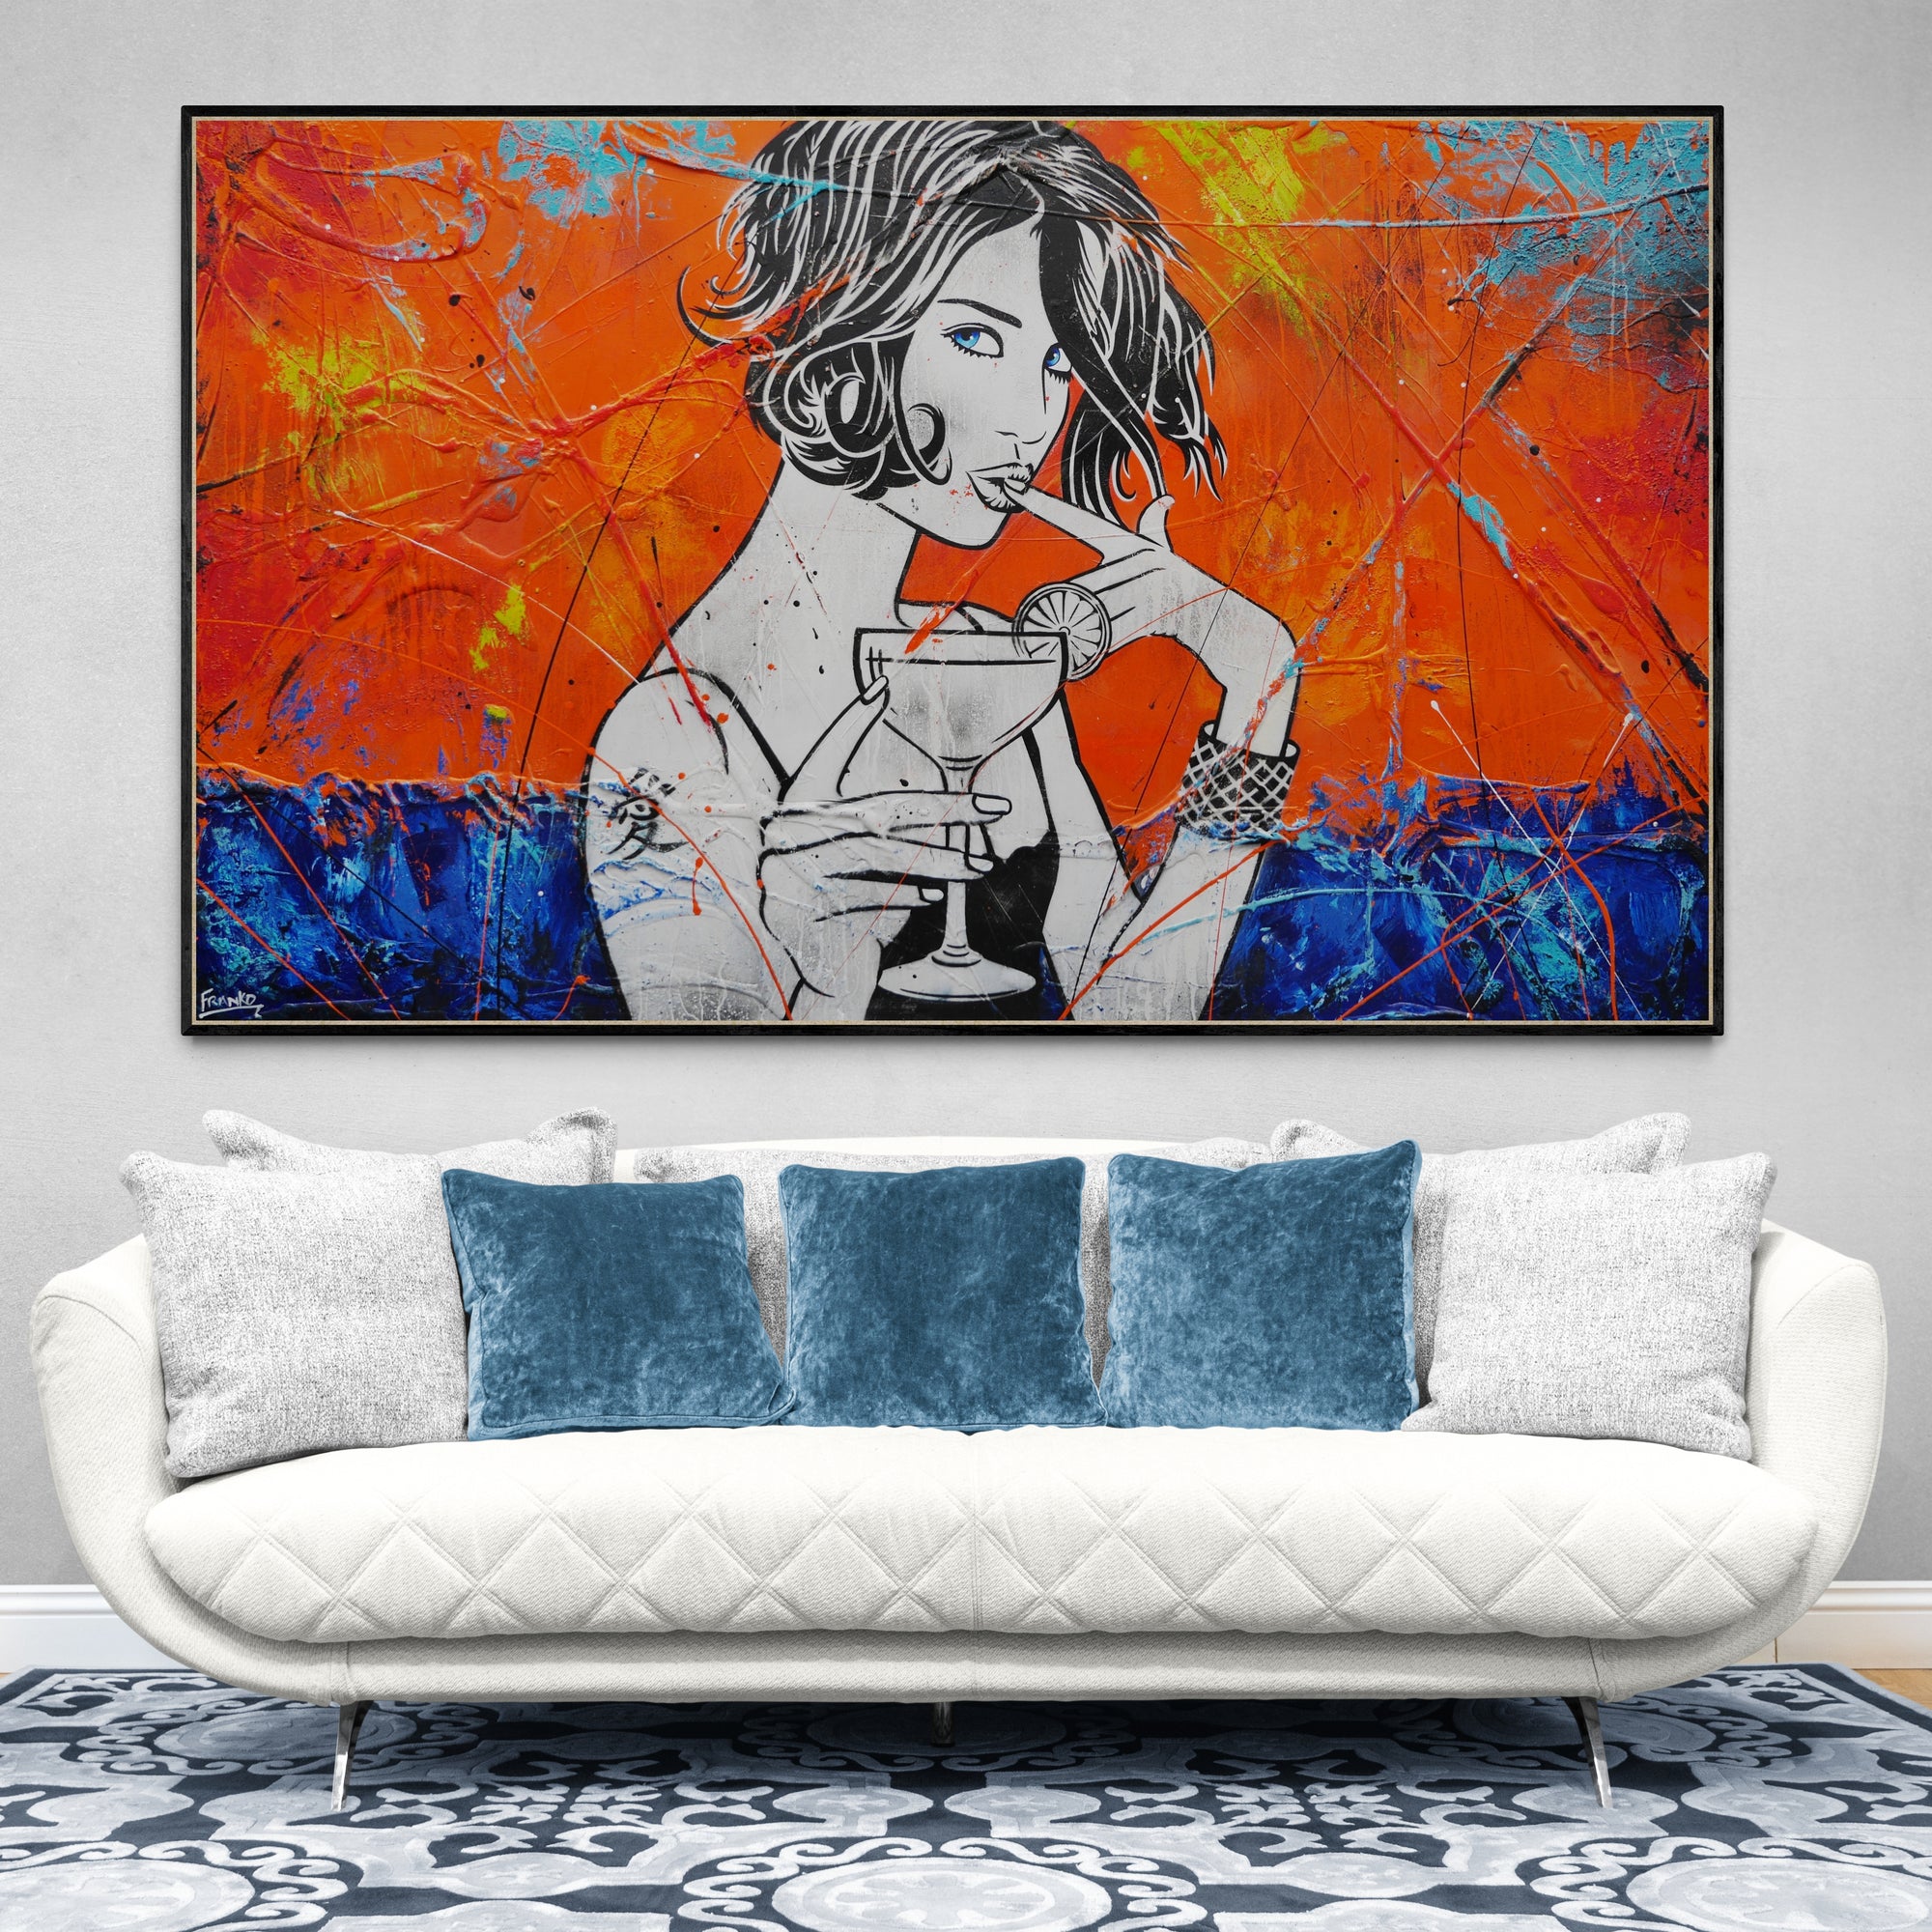 Blue Eyed Cocktails 200cm x 120cm Cocktail Girl Textured Urban Pop Art Painting (SOLD)